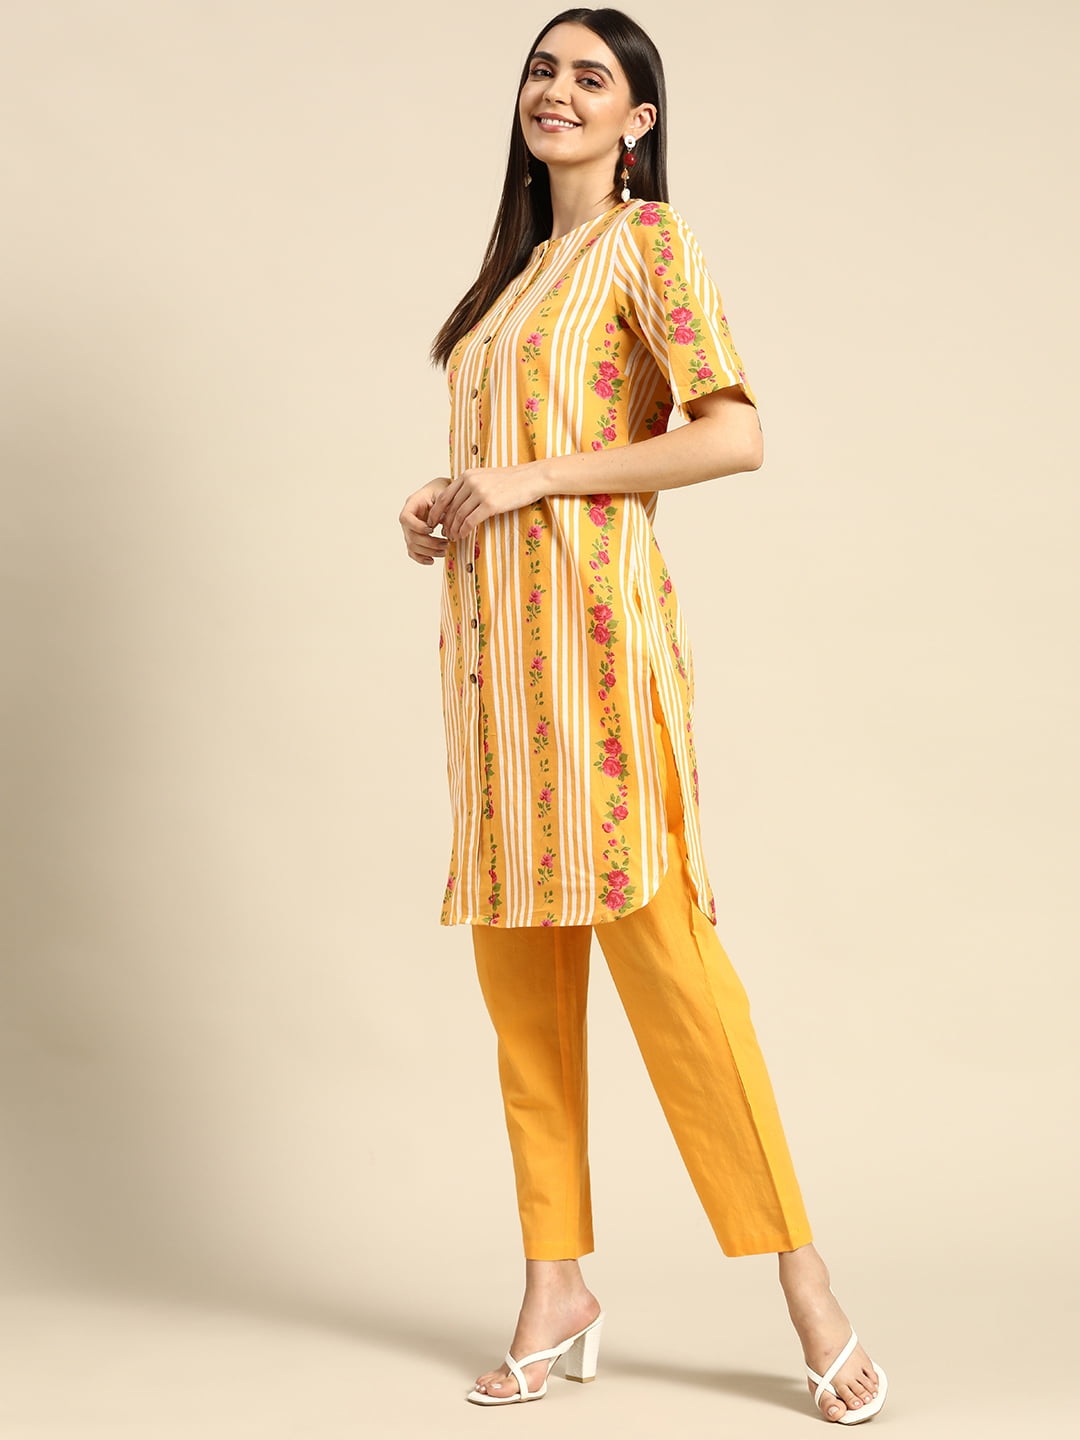 Myntra - Welcoming the festive season with the brightest colour 🌻 Check  out✨Myntra Studio ✨for fashion advice, styling hacks, beauty tips and many  more - all available exclusively on #MyntraStudio on the #